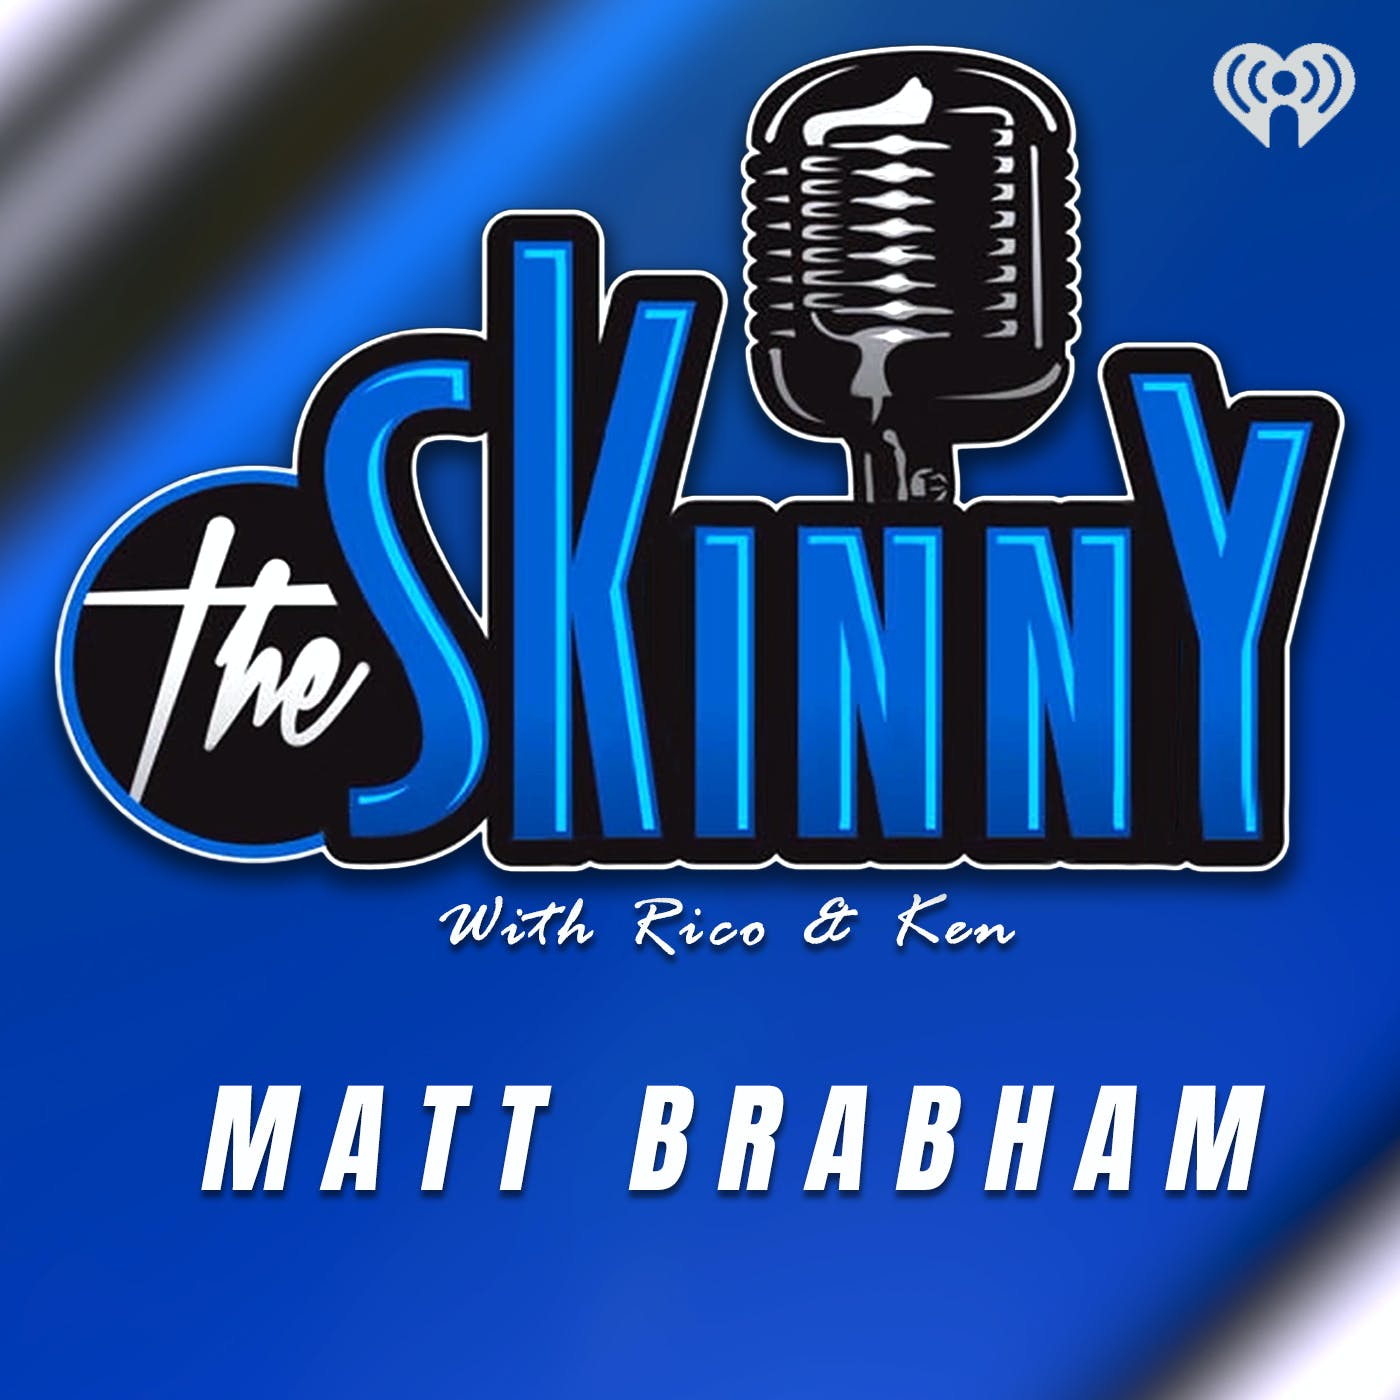 Matt Brabham is this week's guest on The Skinny with Rico and Ken